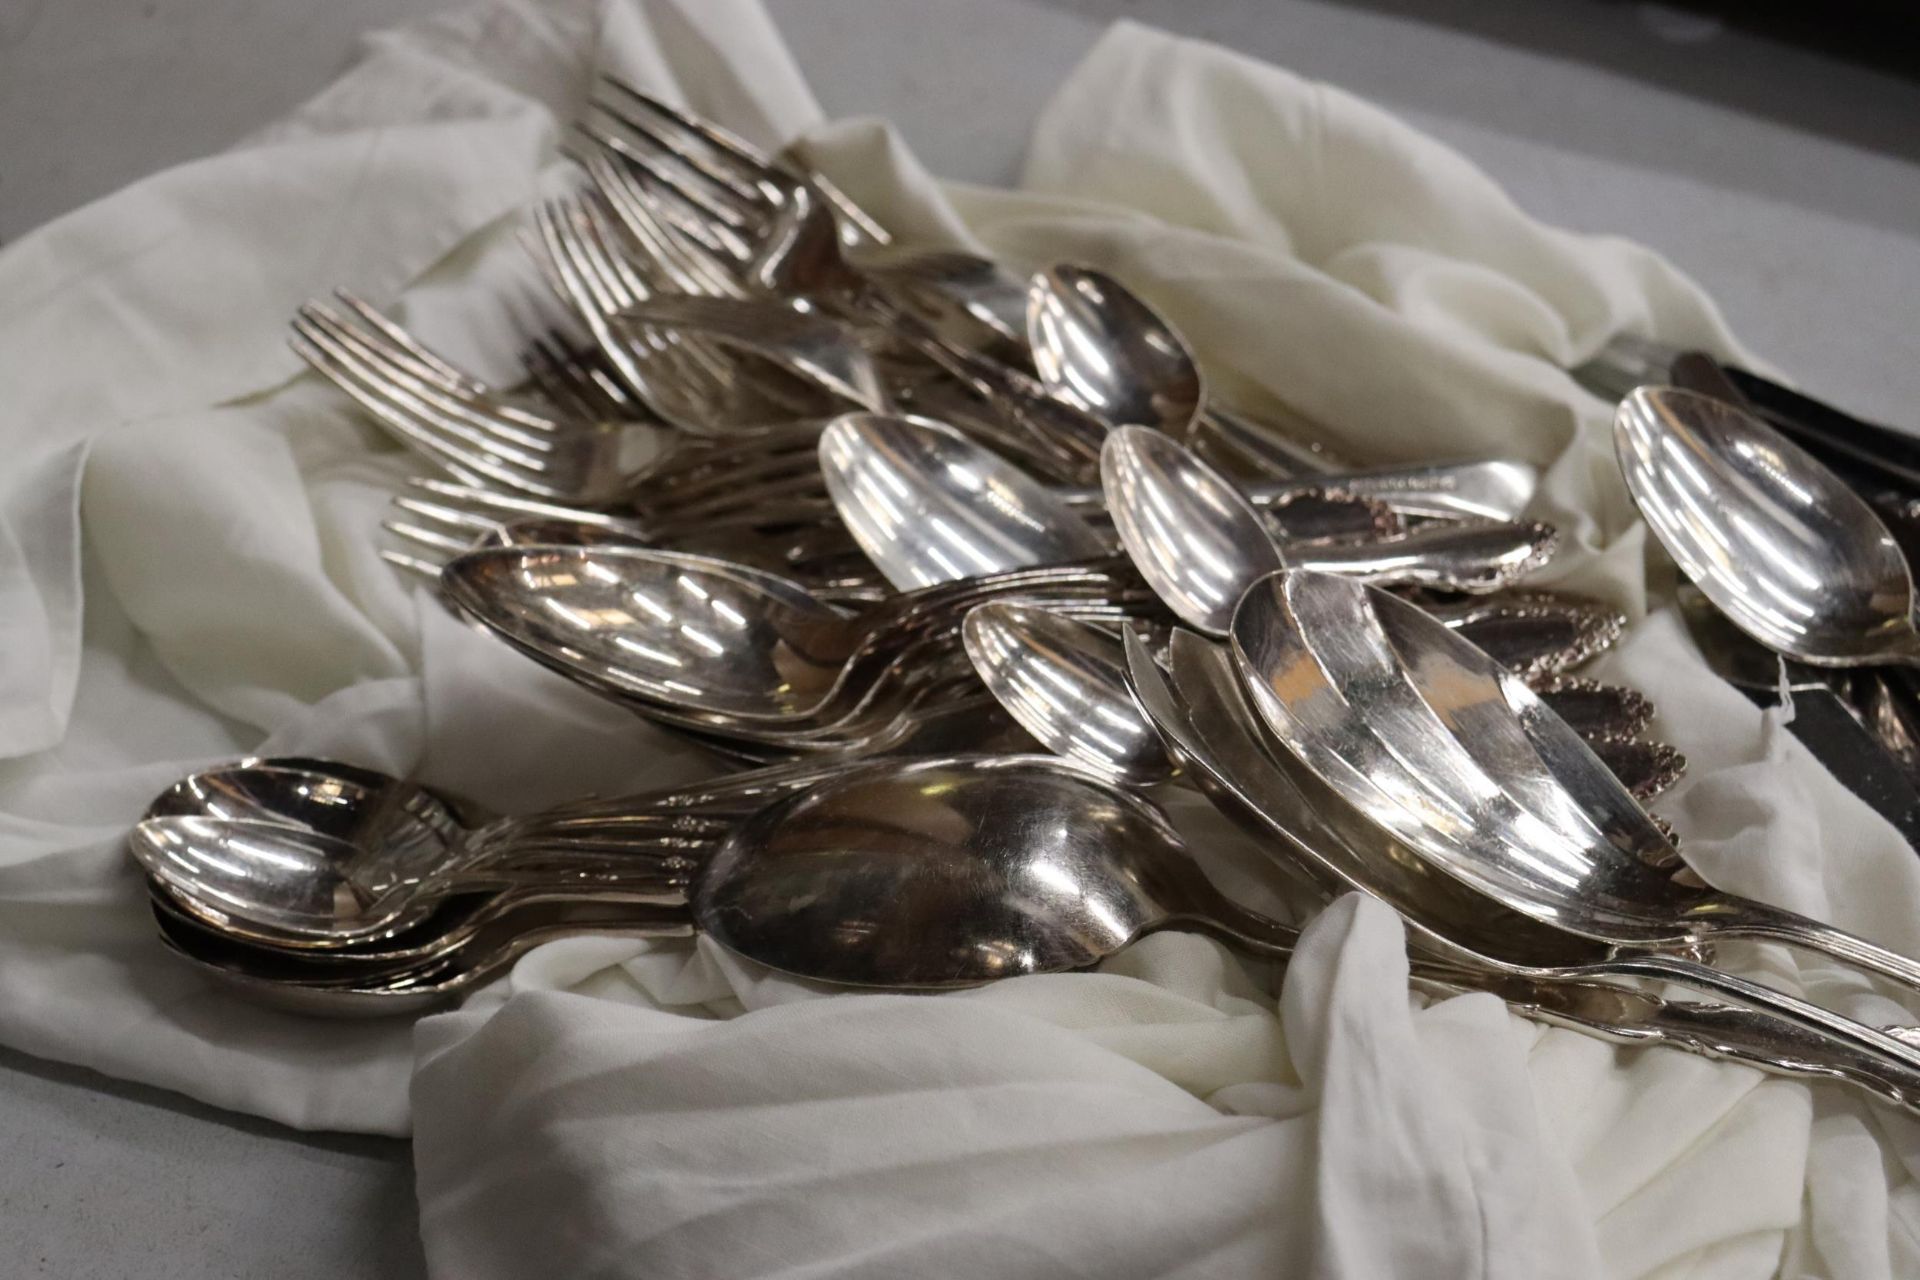 A QUANTITY OF FLATWARE, KNIVES, FORKS AND SPOONS - Image 7 of 9